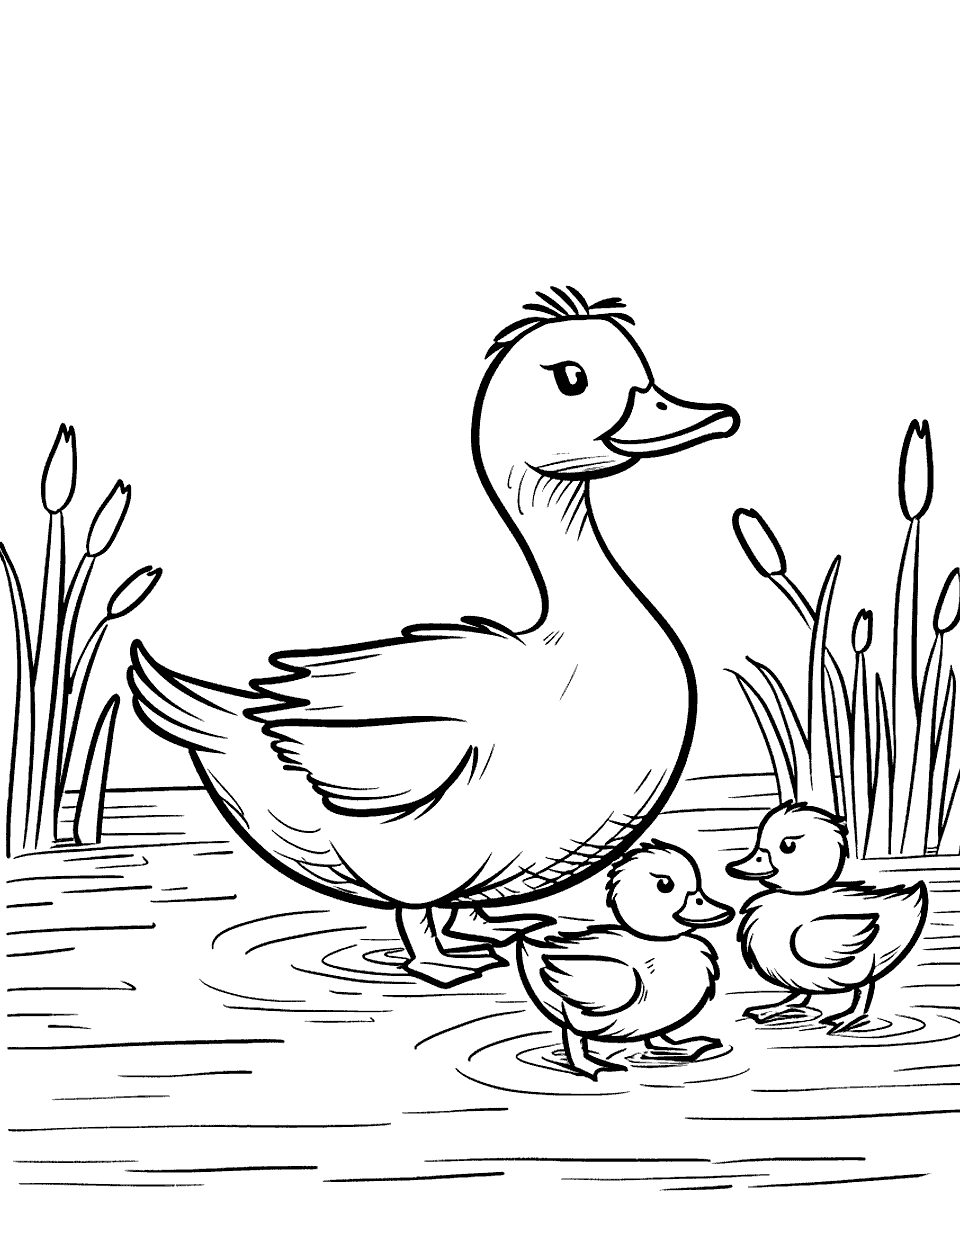 Springtime Duck and Ducklings Coloring Page - A mother duck and her tiny ducklings in a spring meadow.